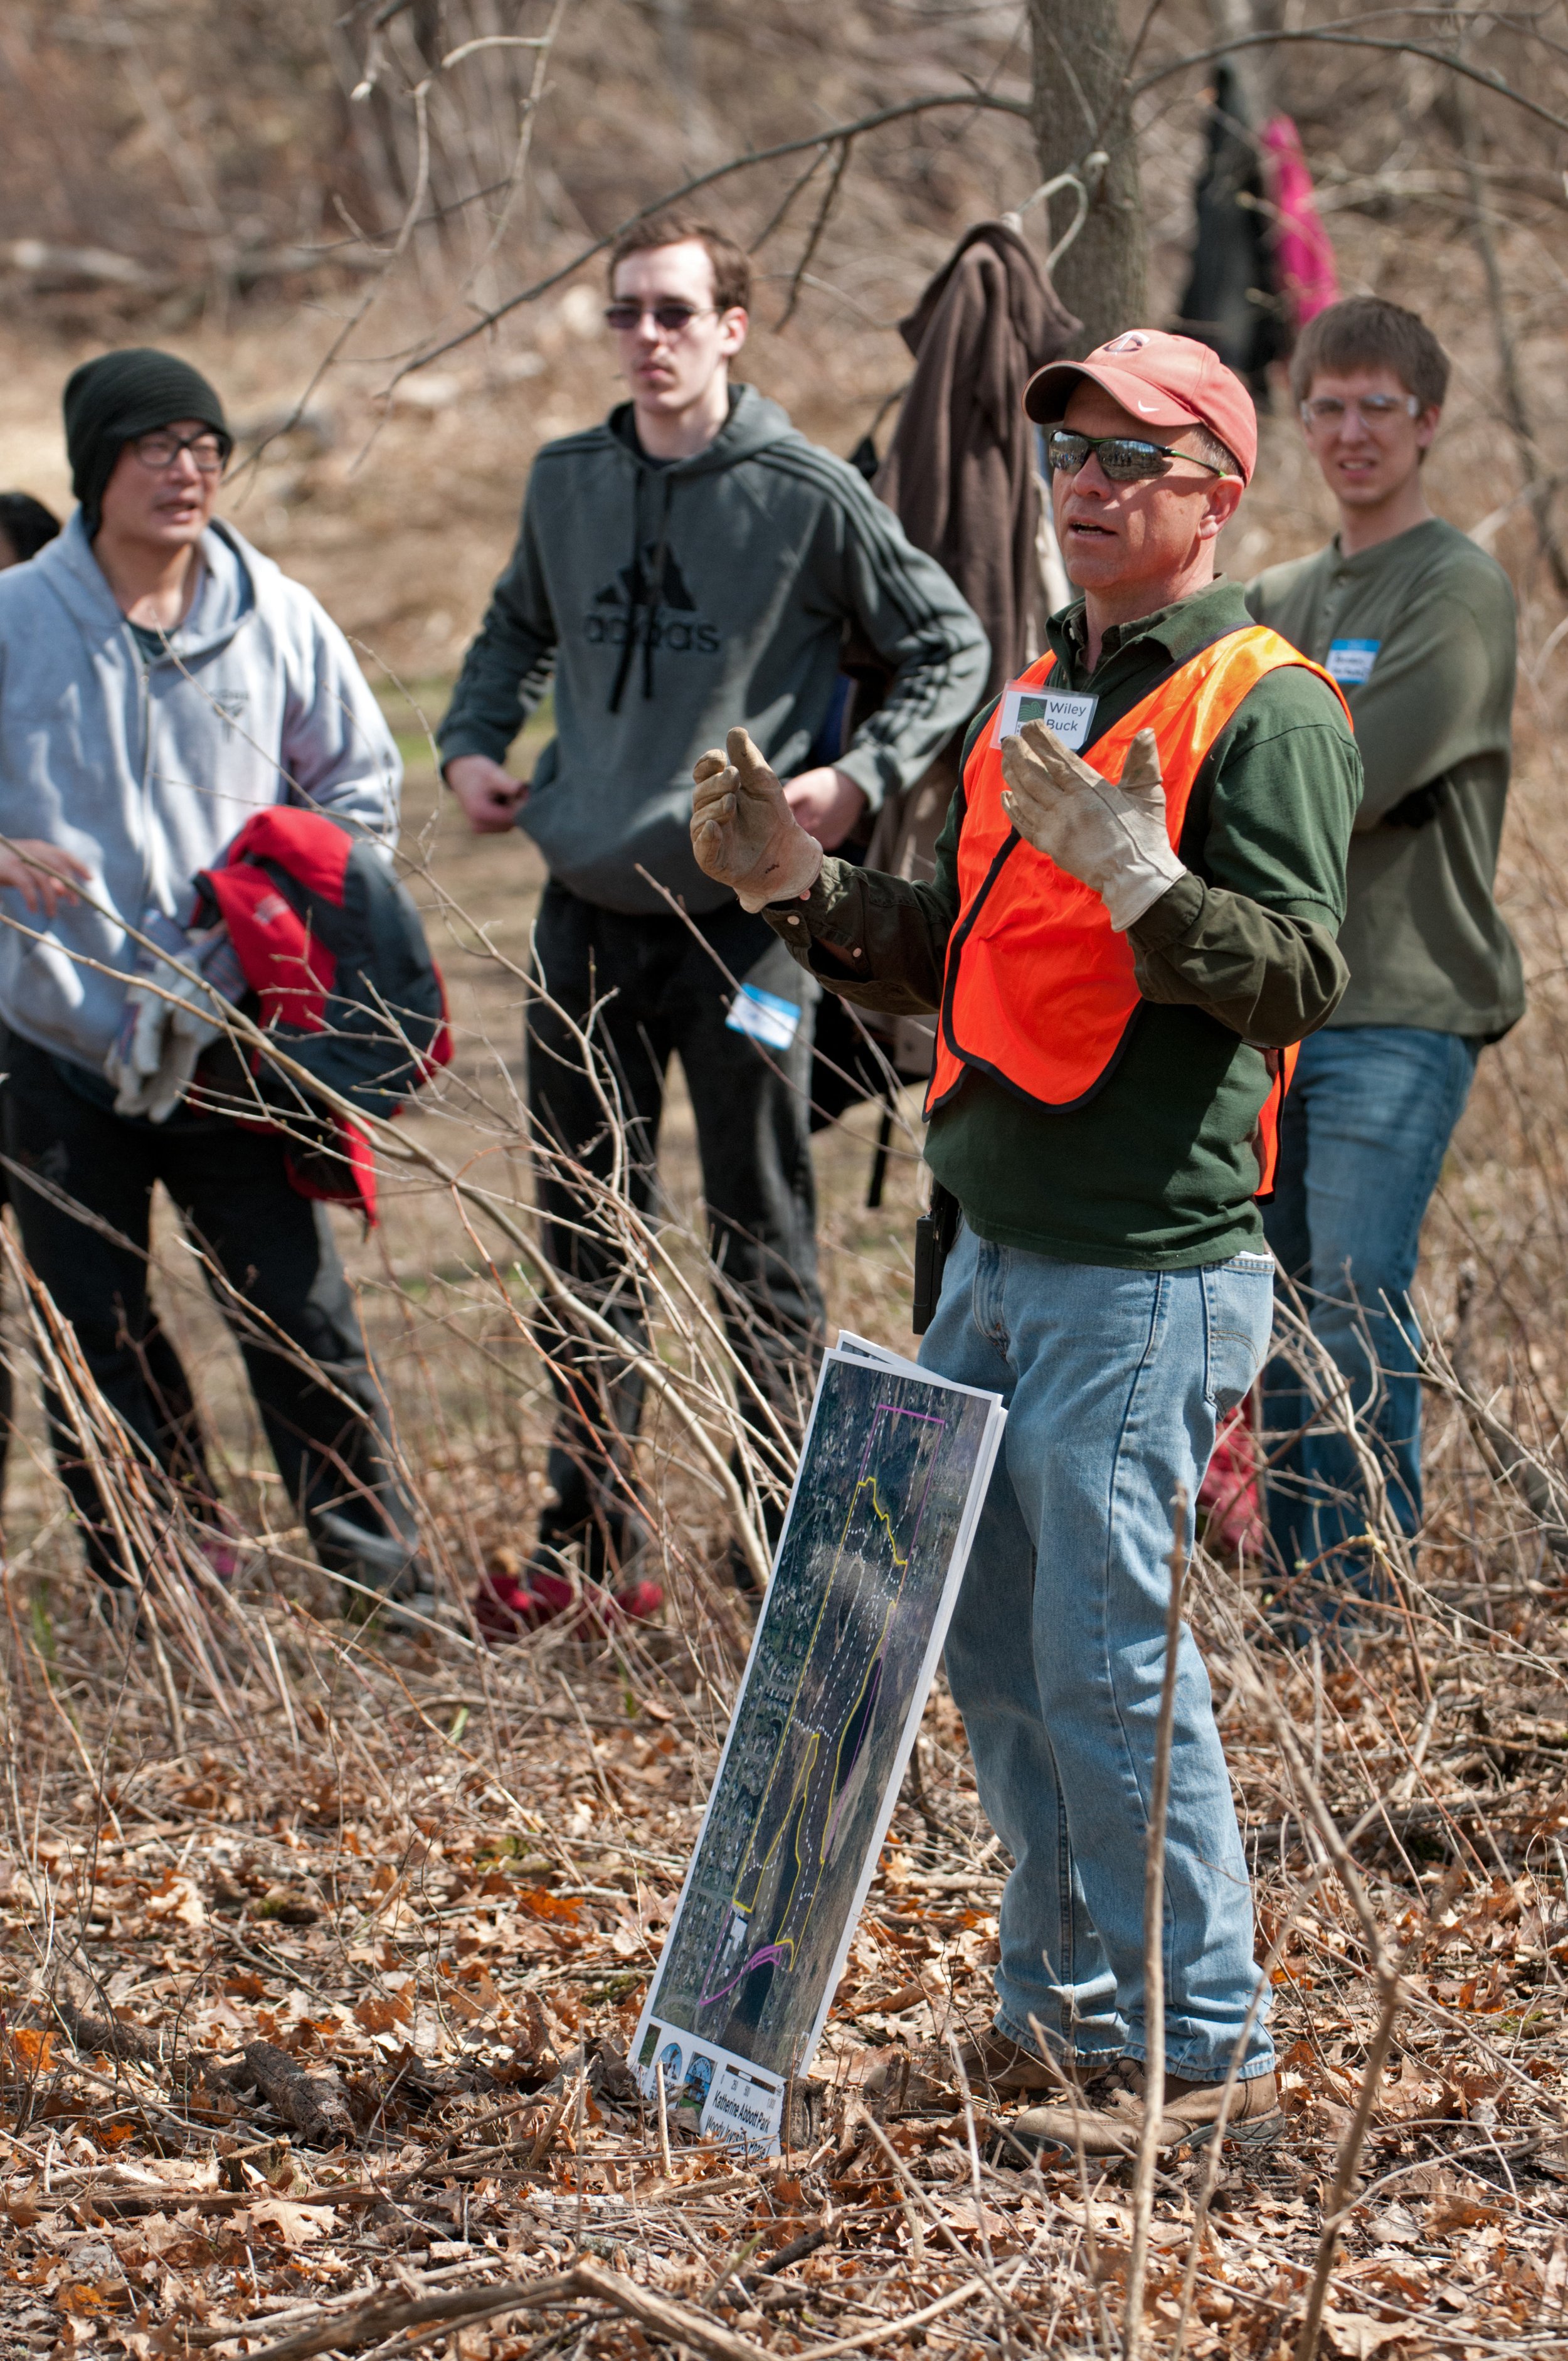 Wiley gives a "Roving Presentation" during a buckthorn removal event at Katherine Abbott Park in 2014 